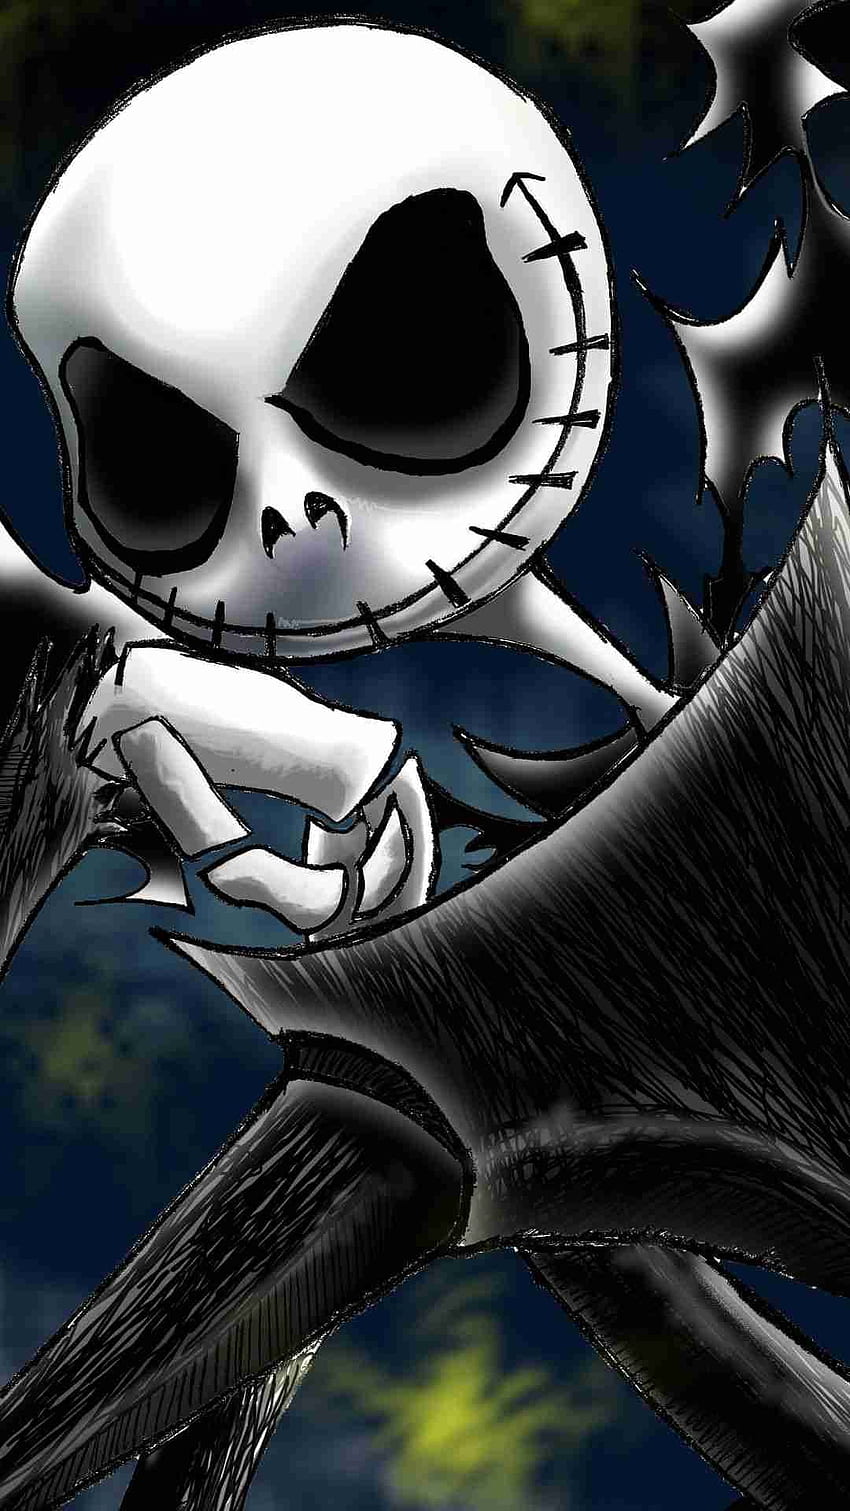 Jack and Sally wallpaper by WoodMoose  Download on ZEDGE  cefe